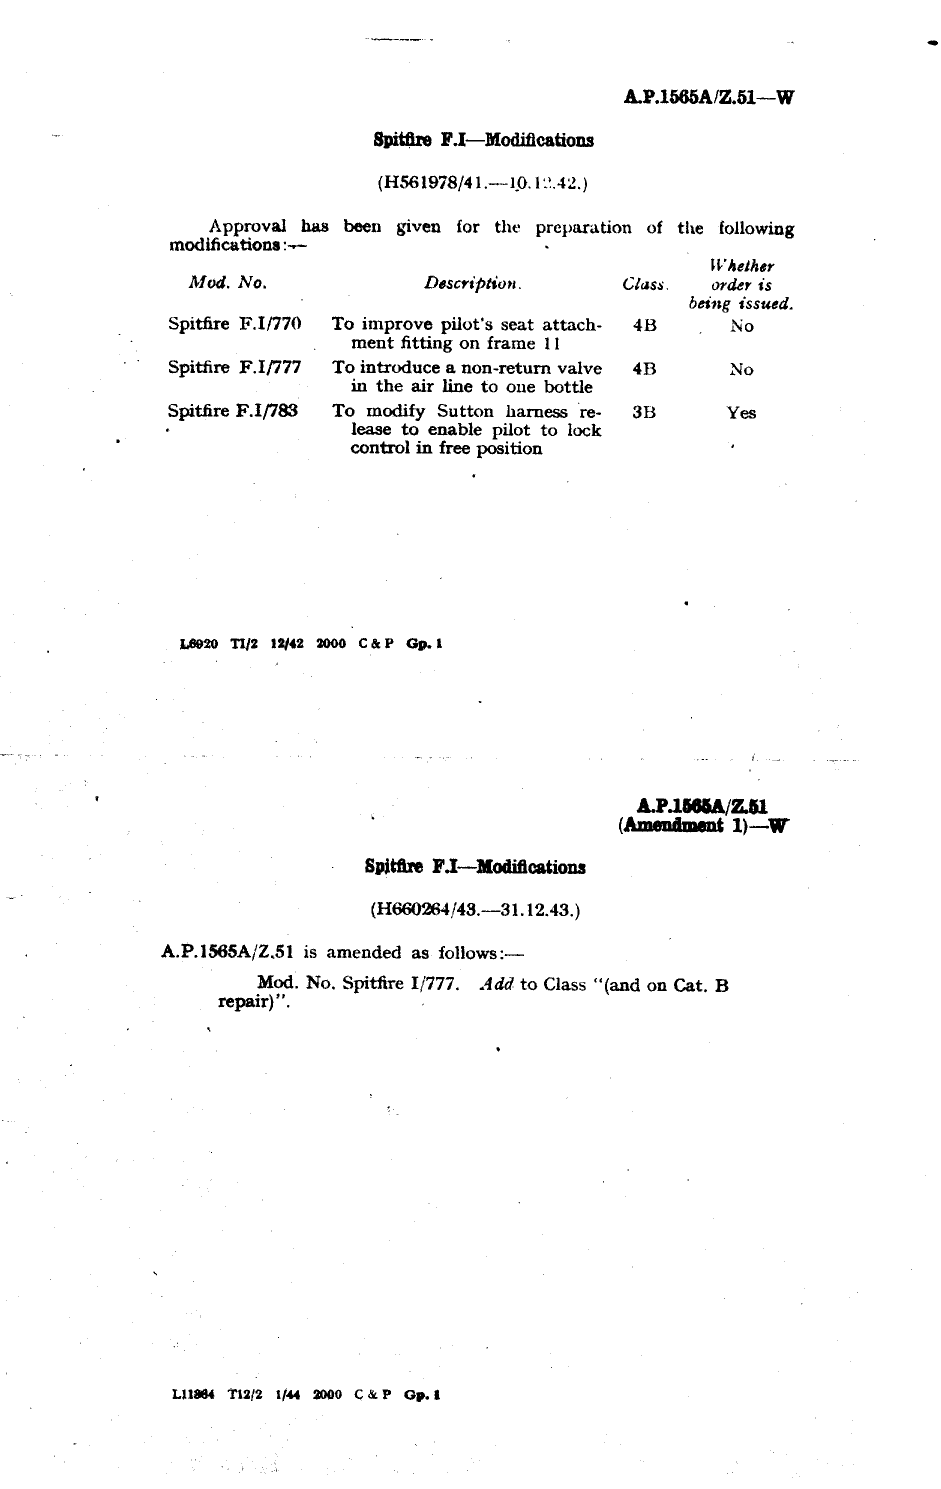 Sample page 1 from AirCorps Library document: Spitfire F.I Modifications 770, 777, and 783